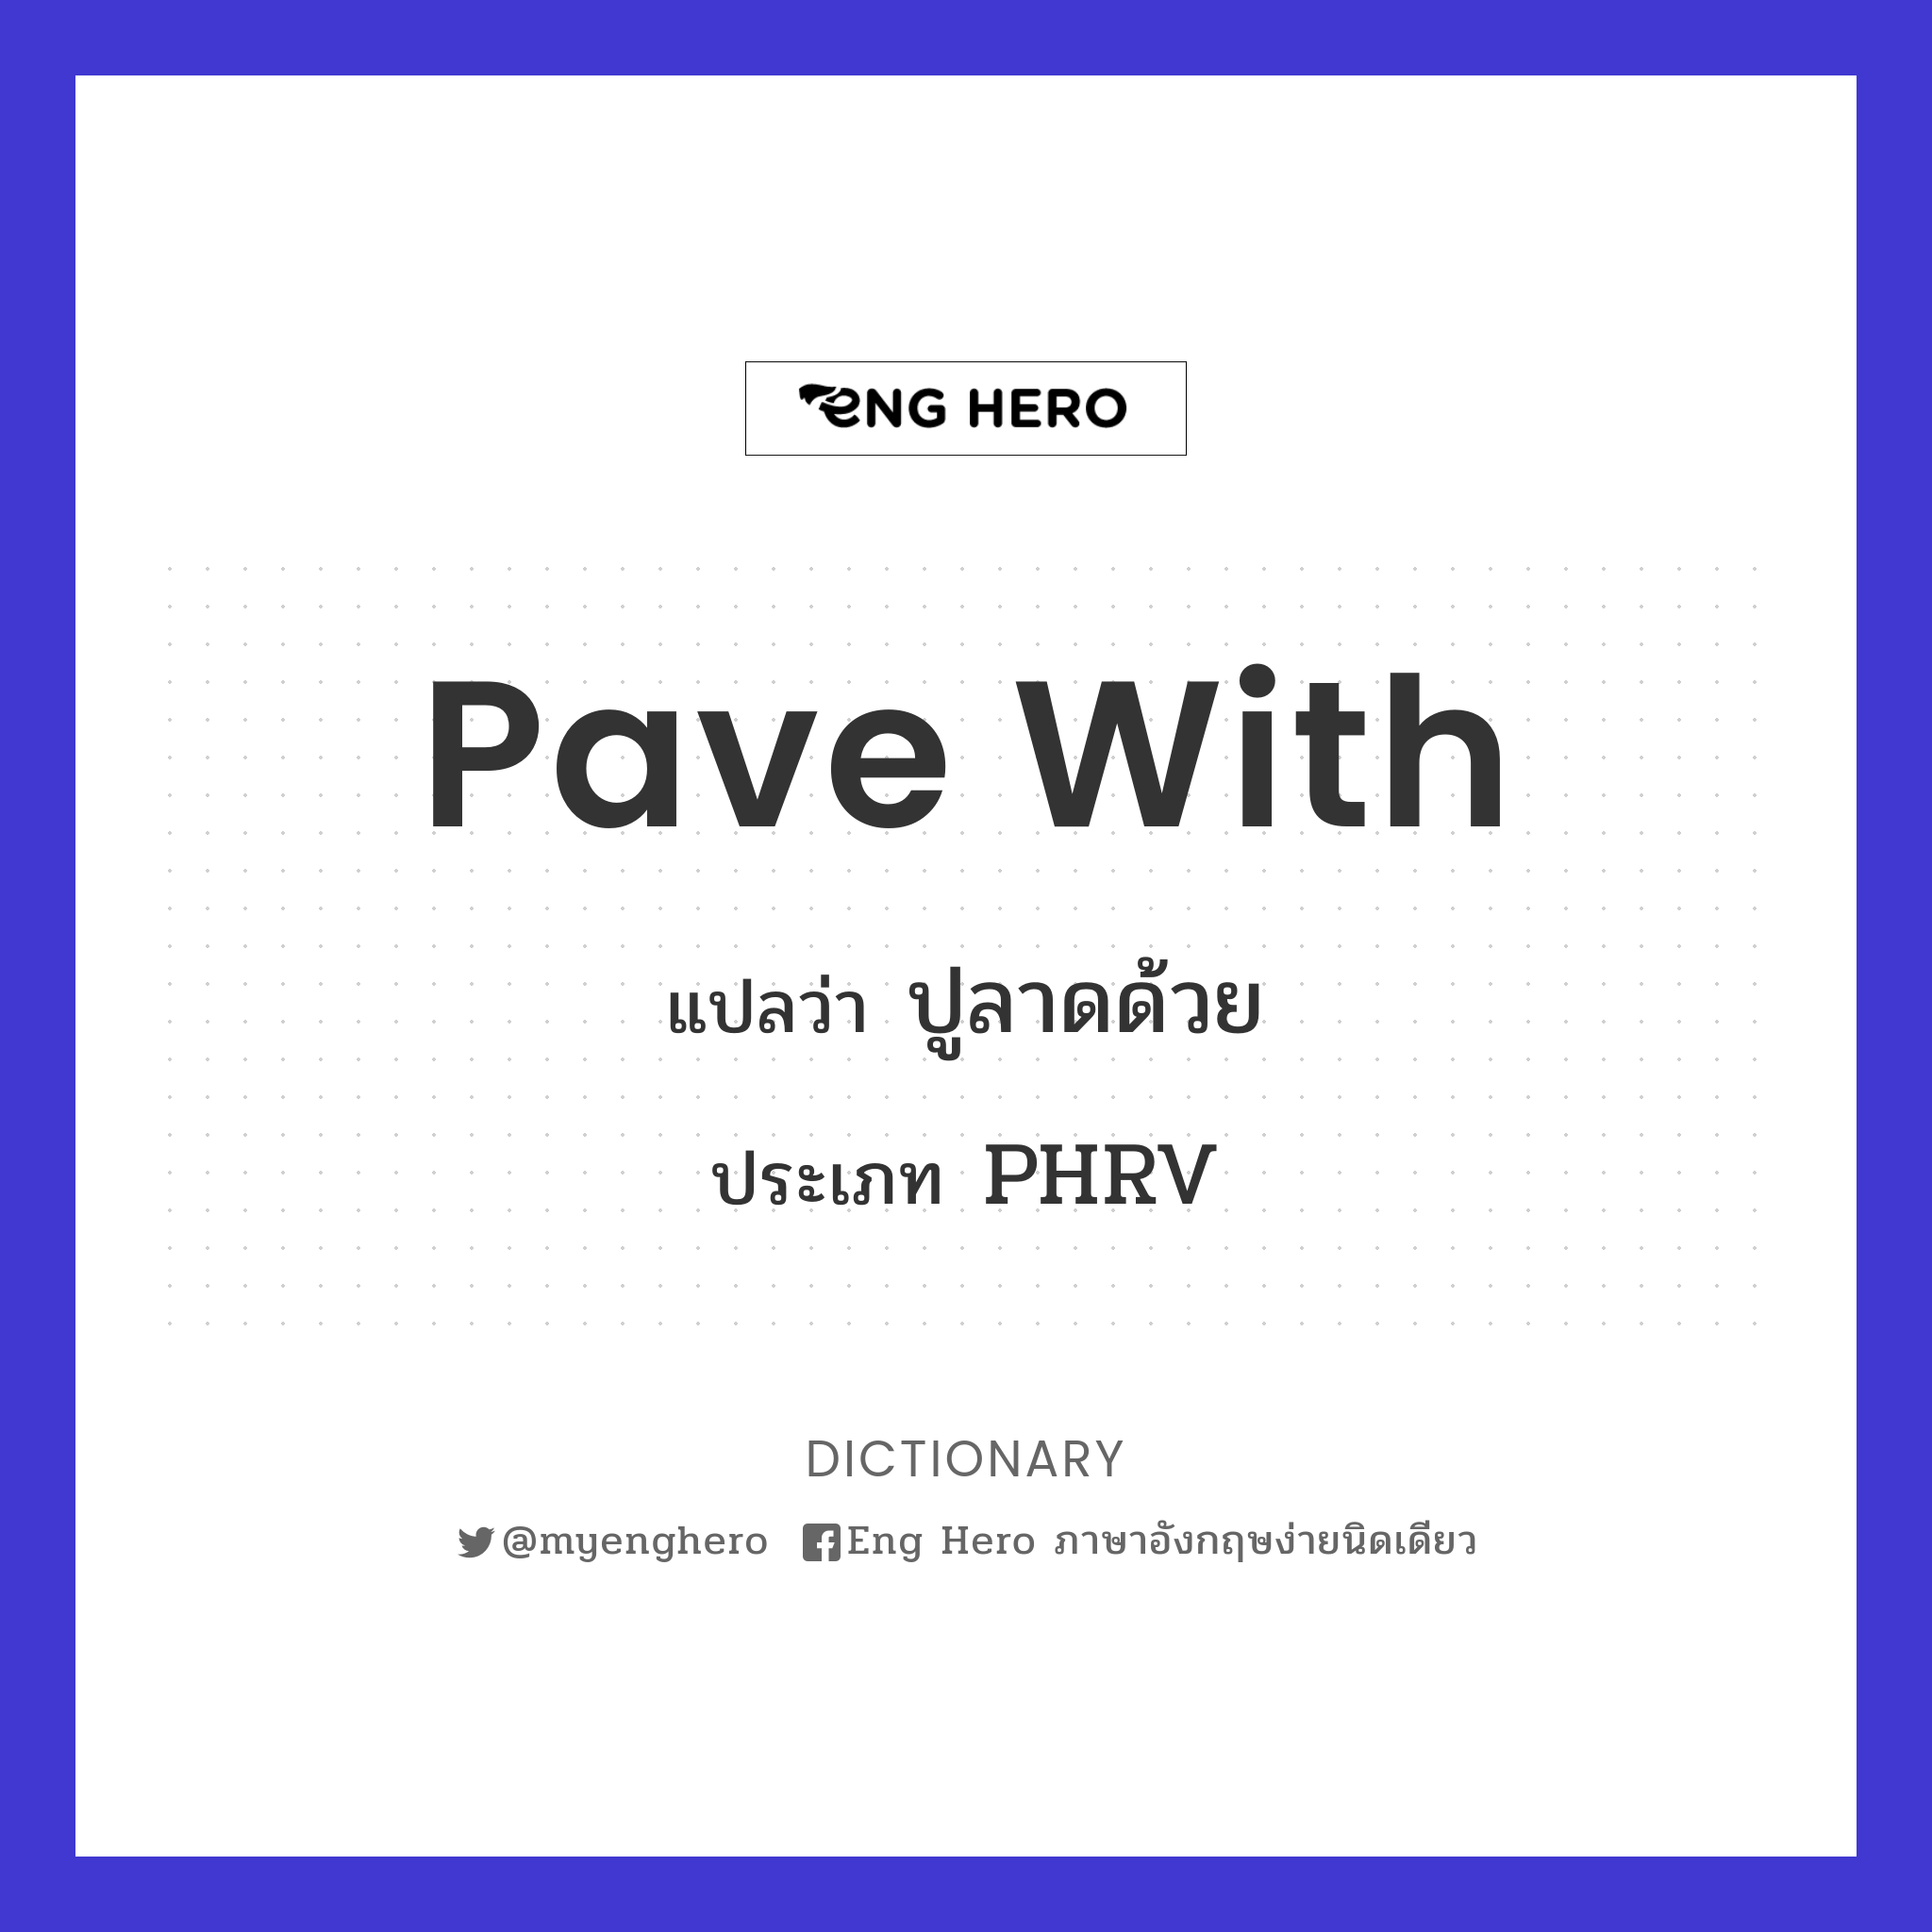 pave with